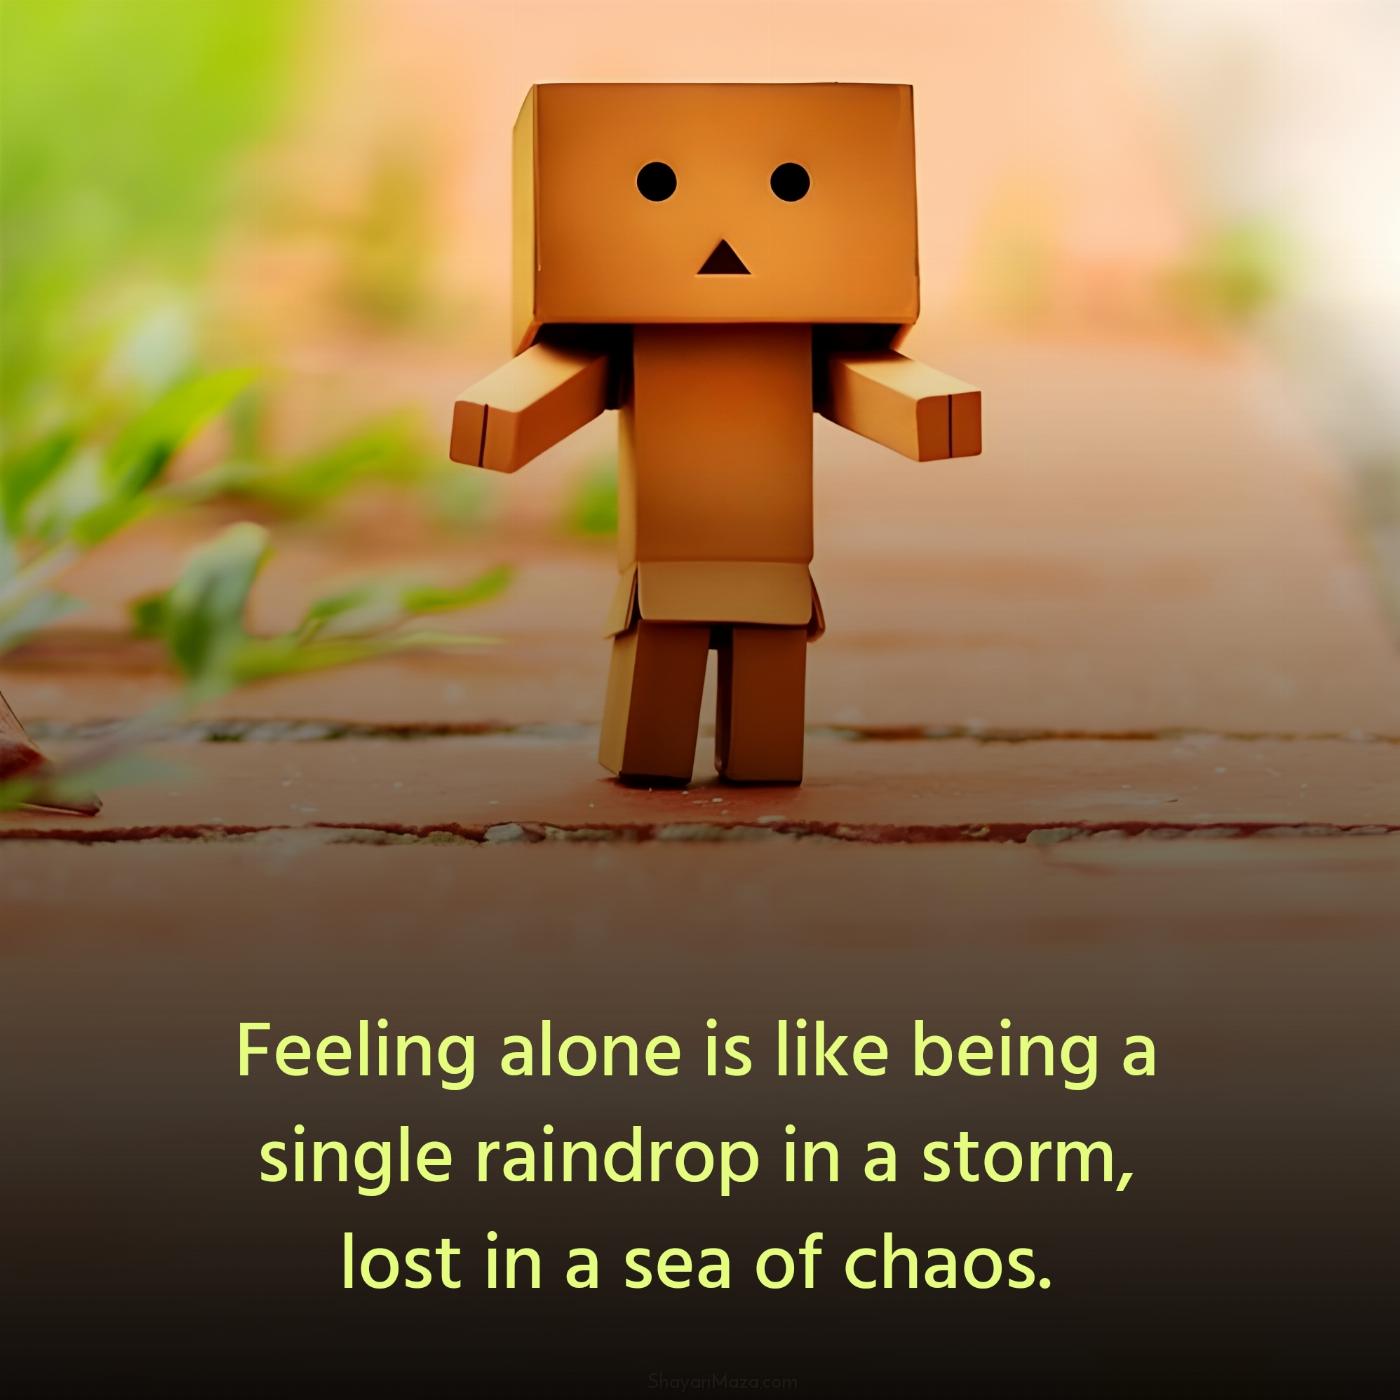 Feeling alone is like being a single raindrop in a storm